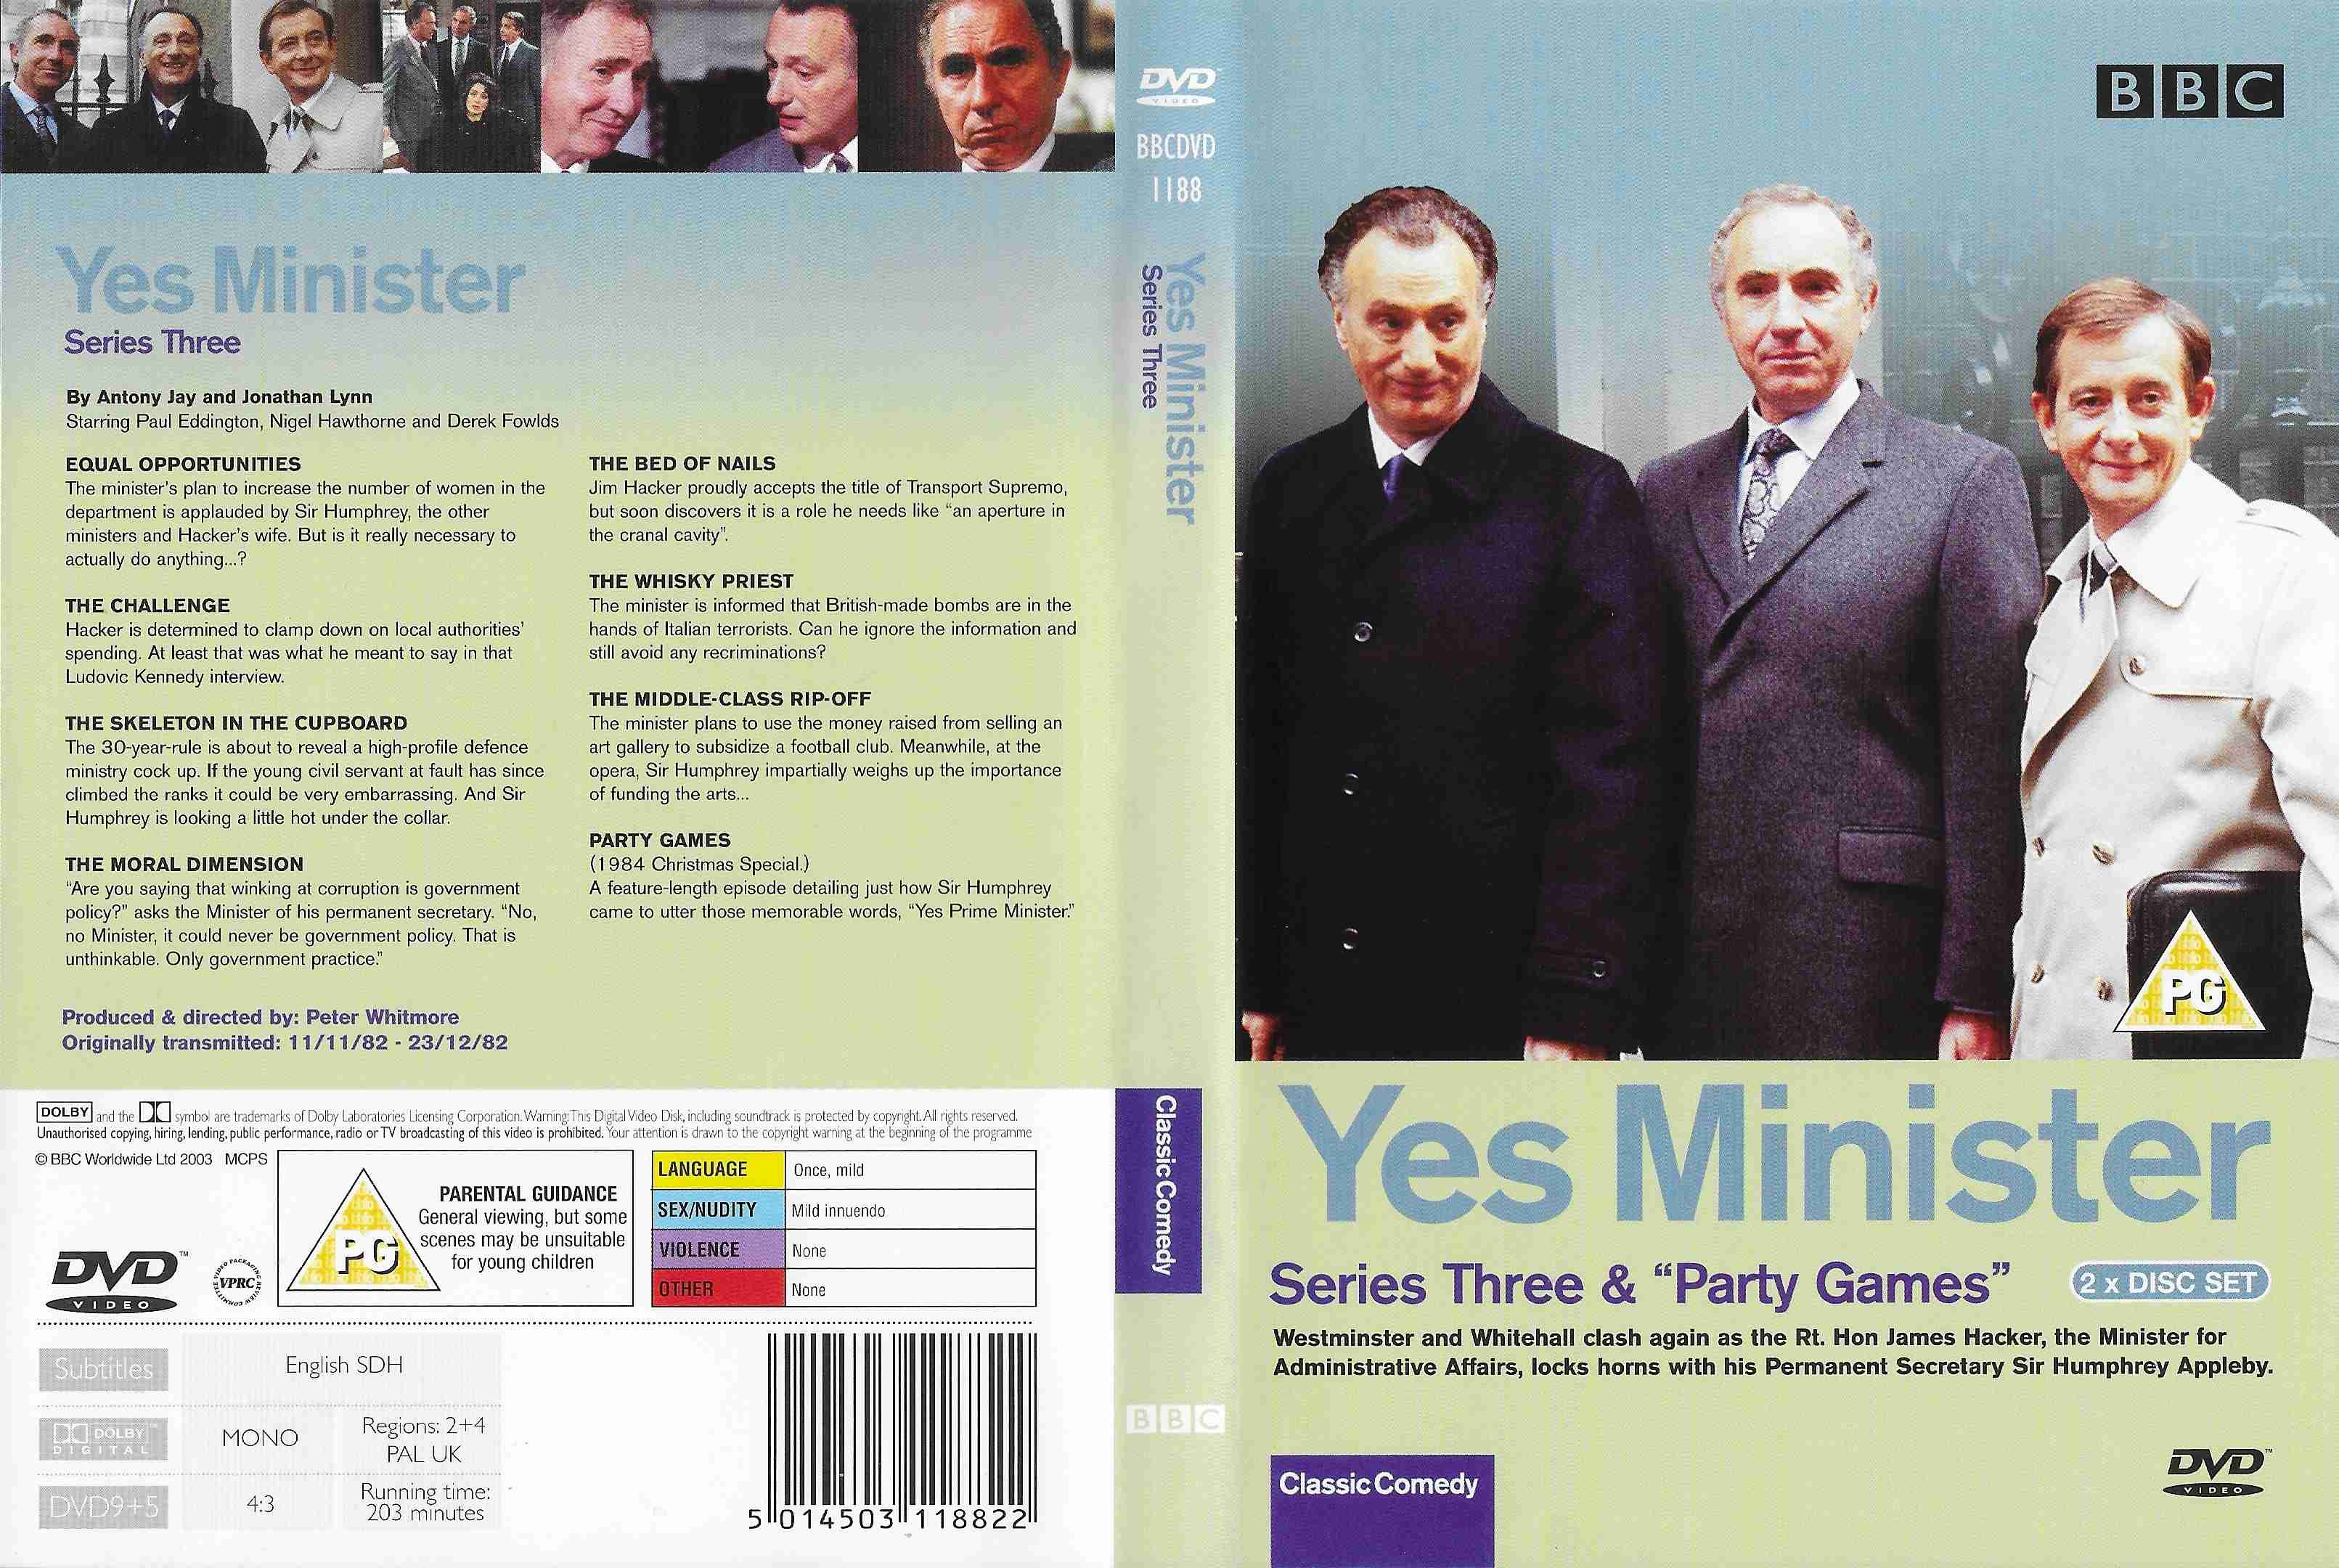 Picture of BBCDVD 1188 Yes Minister - Series Three by artist Antony Jay / Jonathan Lynn from the BBC records and Tapes library